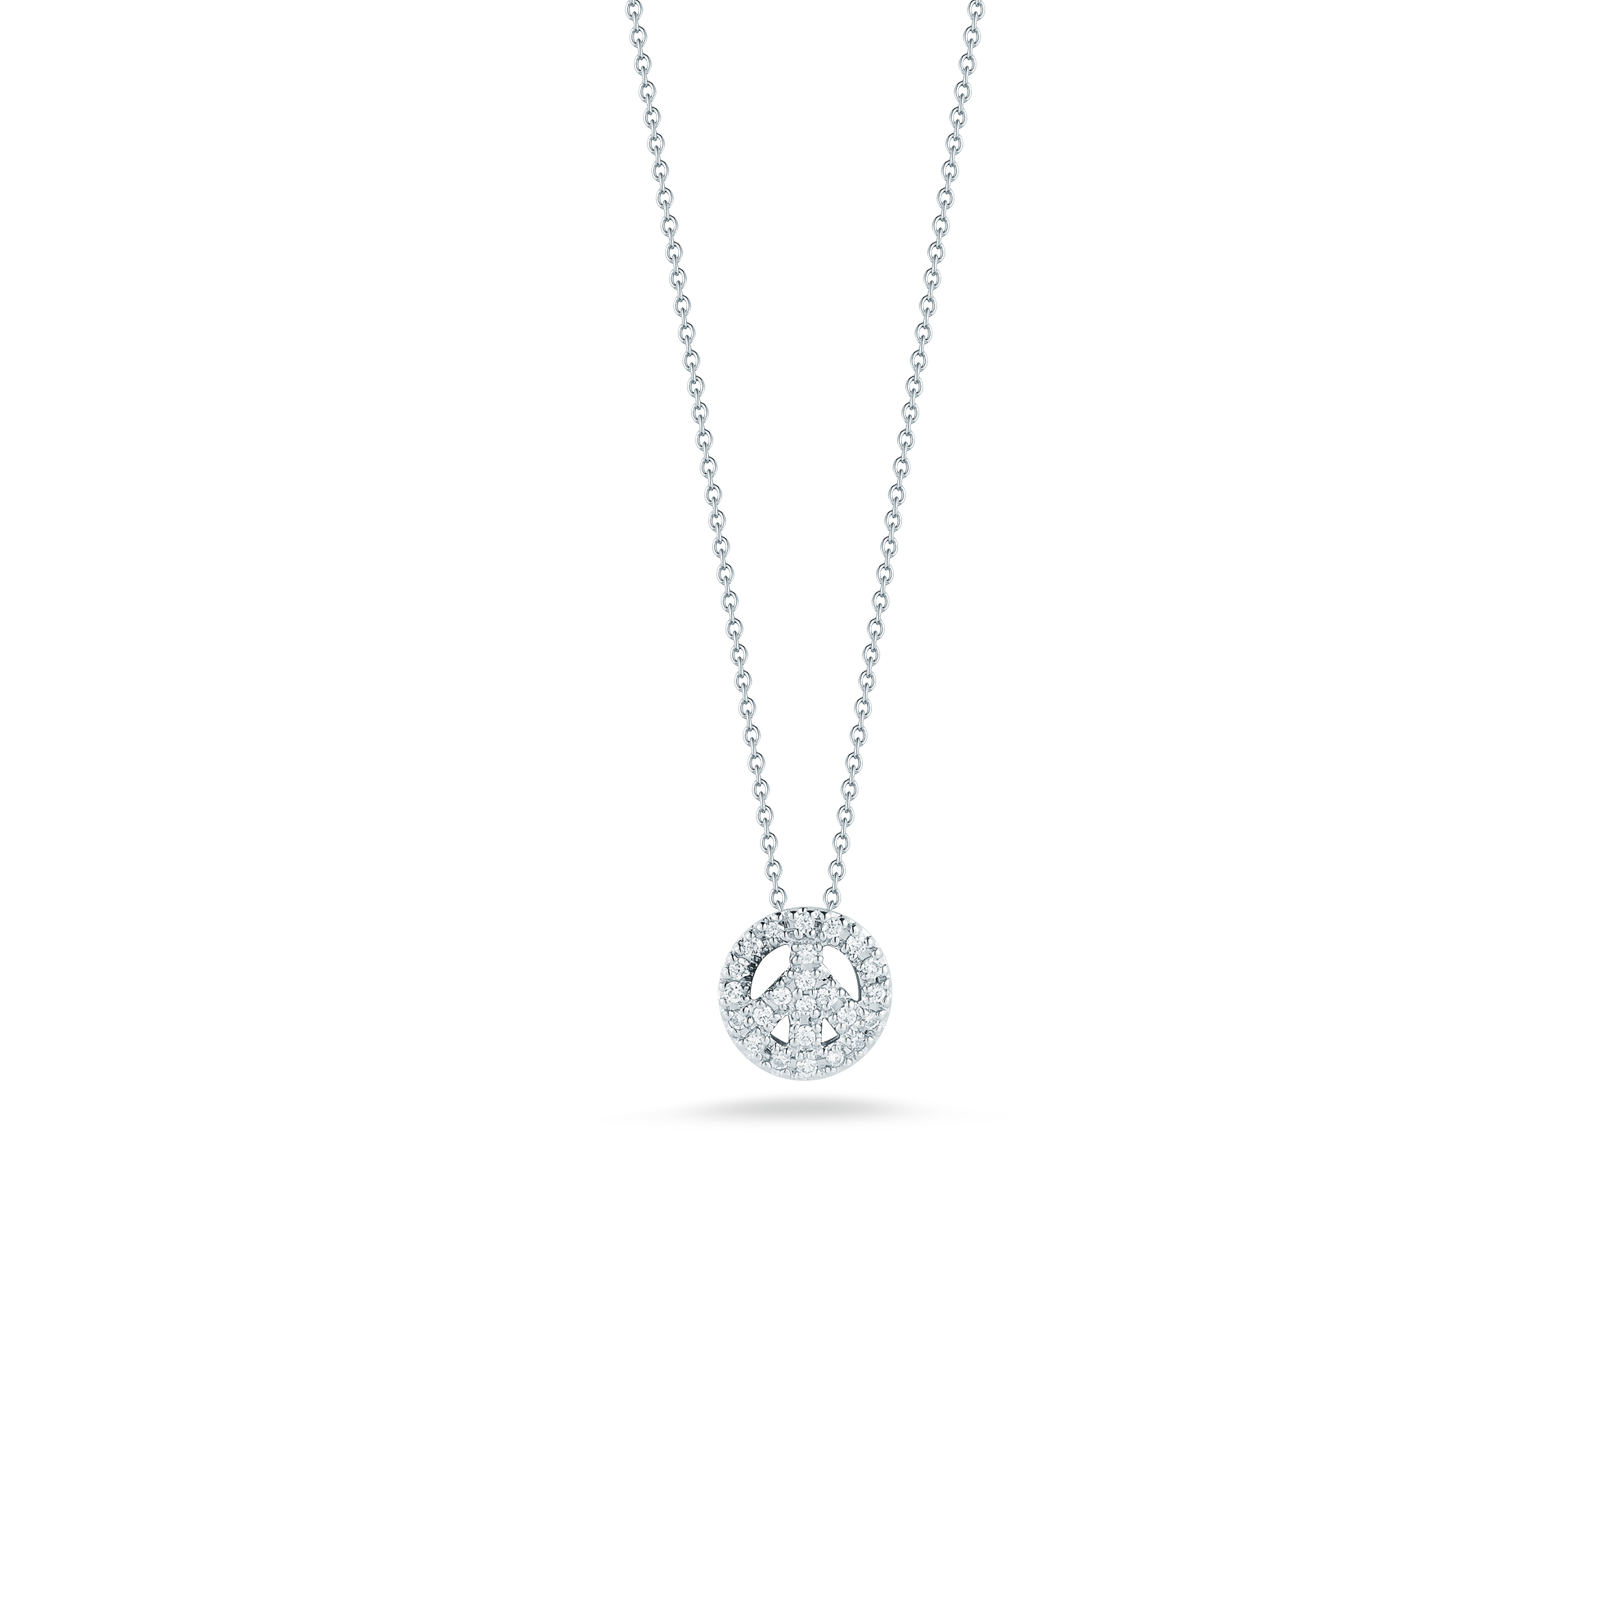 necklace clipart peace sign